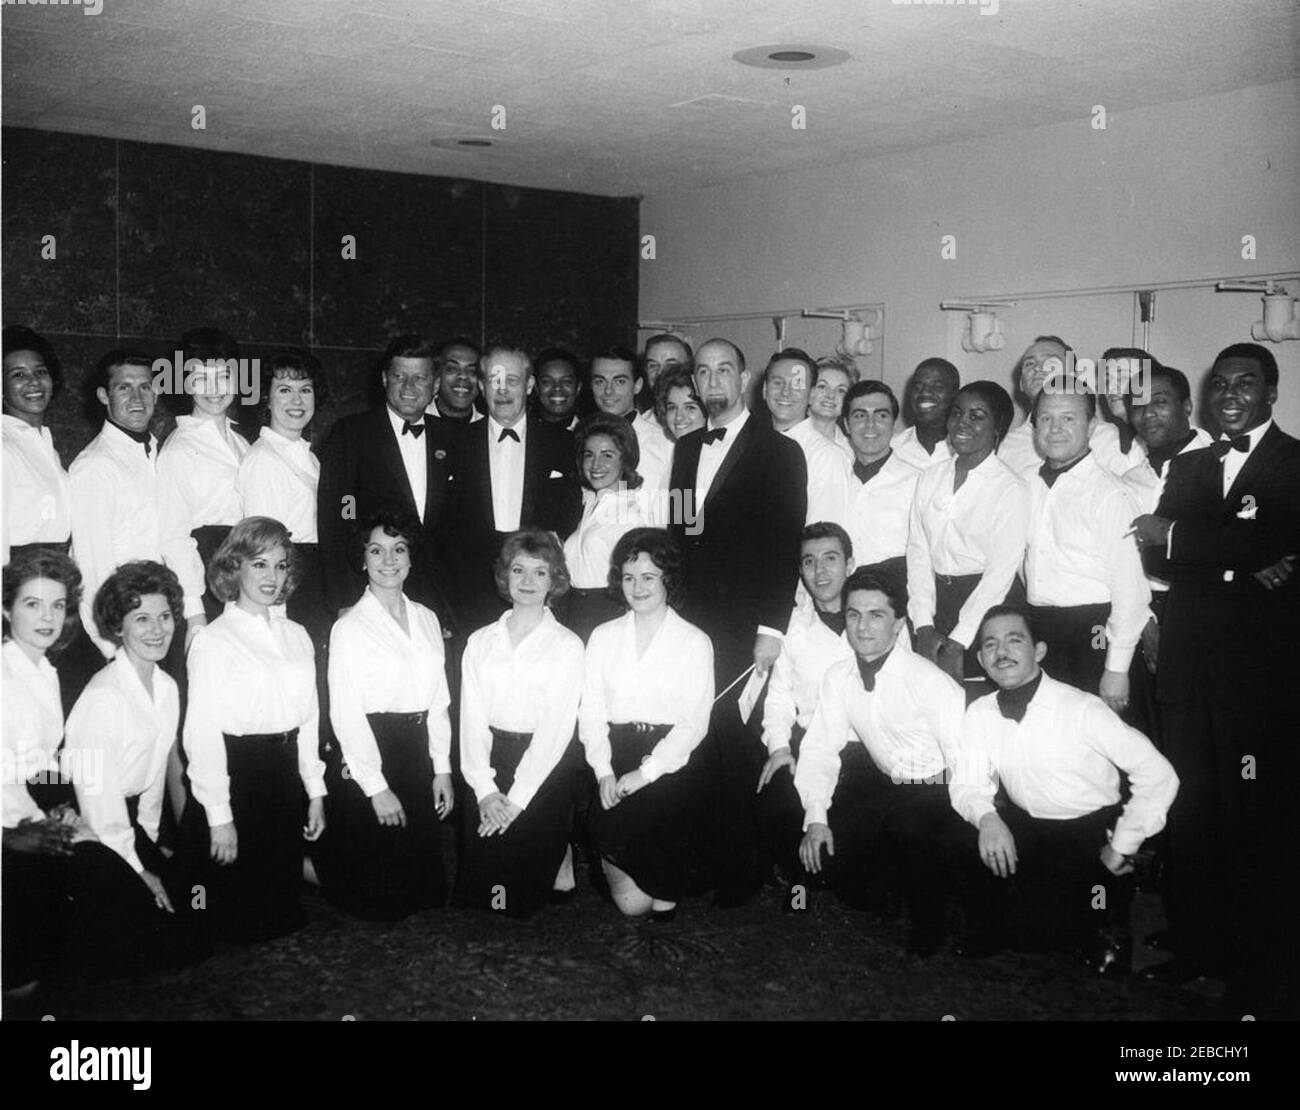 White House Correspondents and News Photographers Dinner, 7:15PM. President John F. Kennedy and Prime Minister Harold Macmillan of Great Britain stand with members of the chorus, who performed at the White House Correspondents and News Photographers Dinner. Members include: Issa Annal; Darrell J. Askey; Helen Baisley; Raymond Byrne; Lester Clark, Jr.; Georgia Creighton; Al De Sio; Charles Dunn; Luce Ennis; Patricia Finch; Jay Gerber; Scott Gibson; Iris Hanisch; Victor R. Helou; Lee Hooper; Lee Howard; Chuck James; Maryann Kerrick; Anne Krueger; Sherry Lambert; Henry Lawrence; James Lowe; Rosal Stock Photo